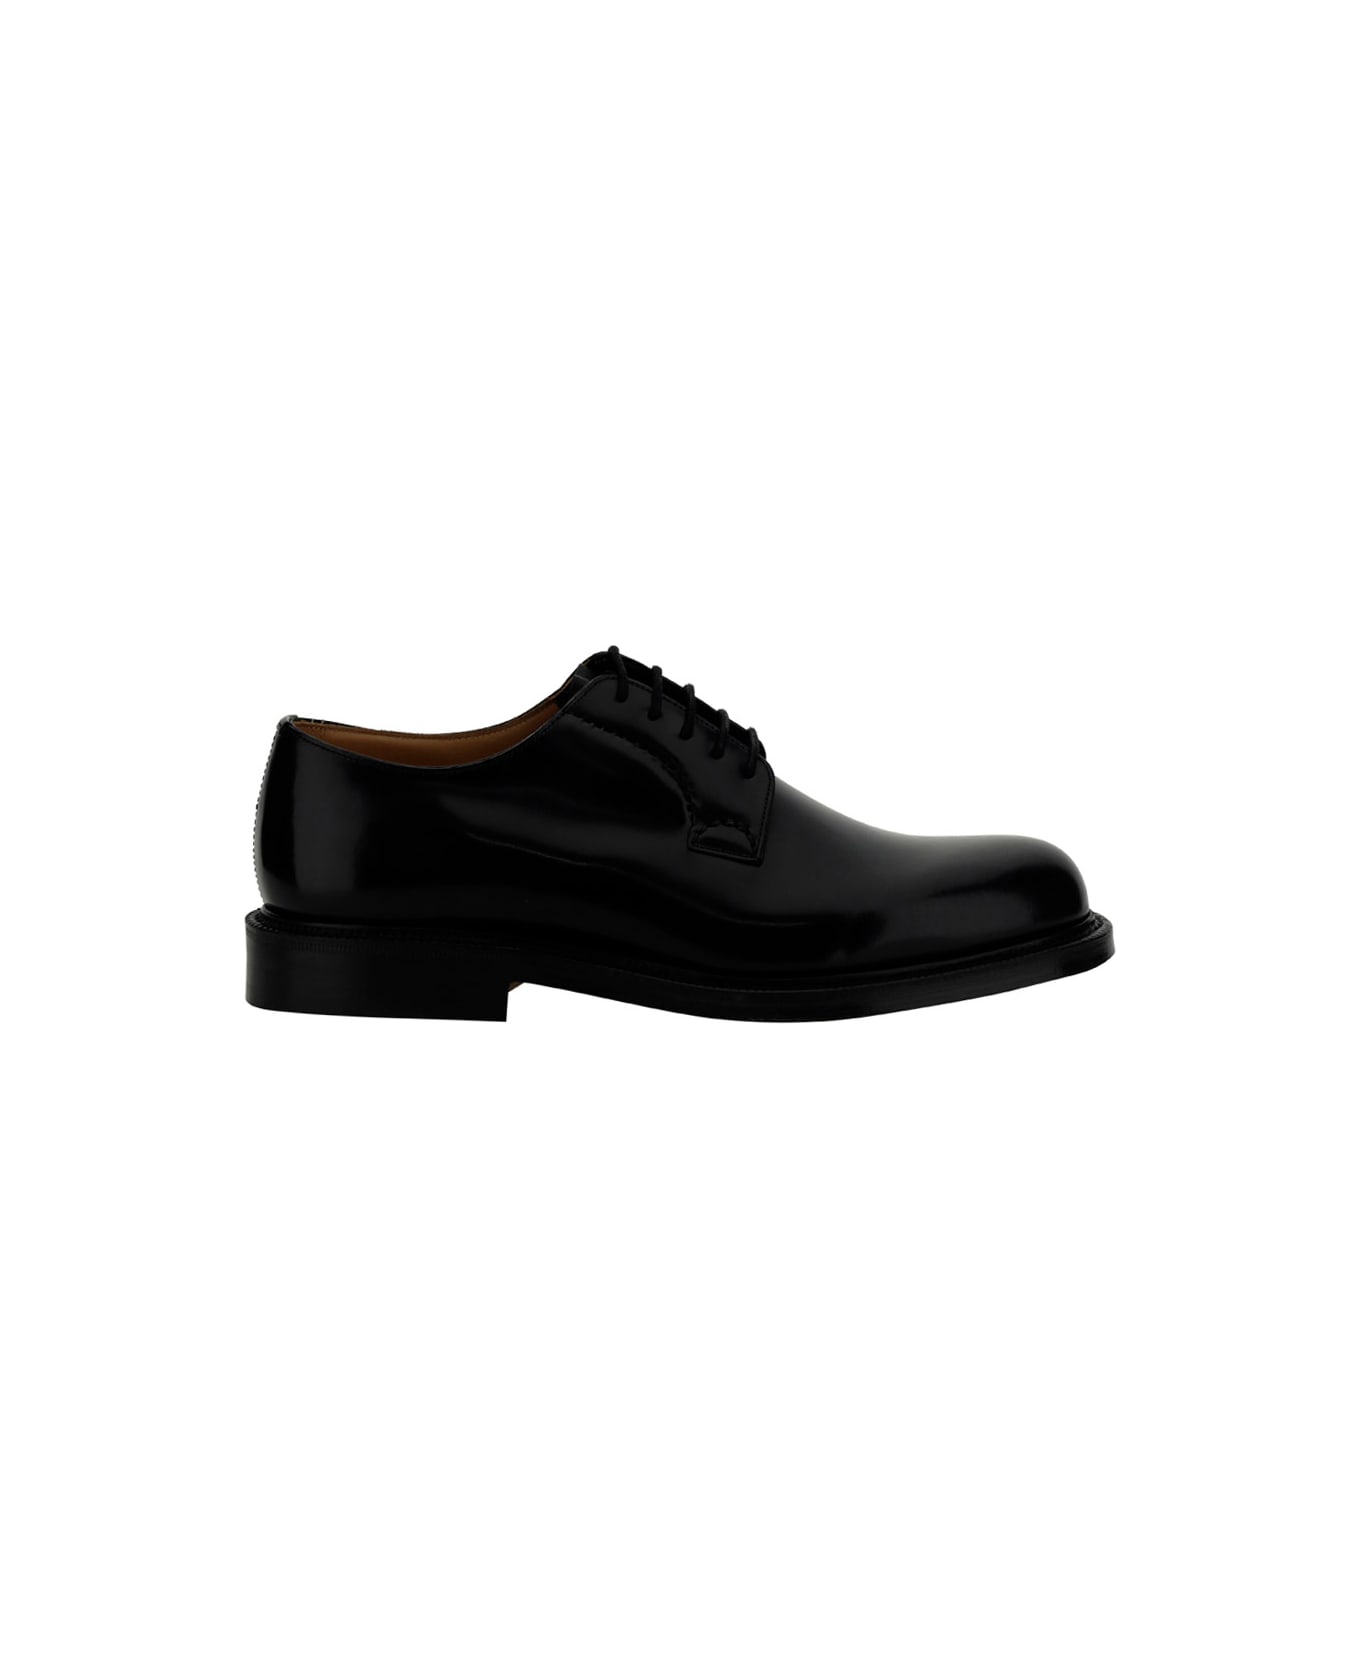 Church's Lace-up Shoes - Black ローファー＆デッキシューズ